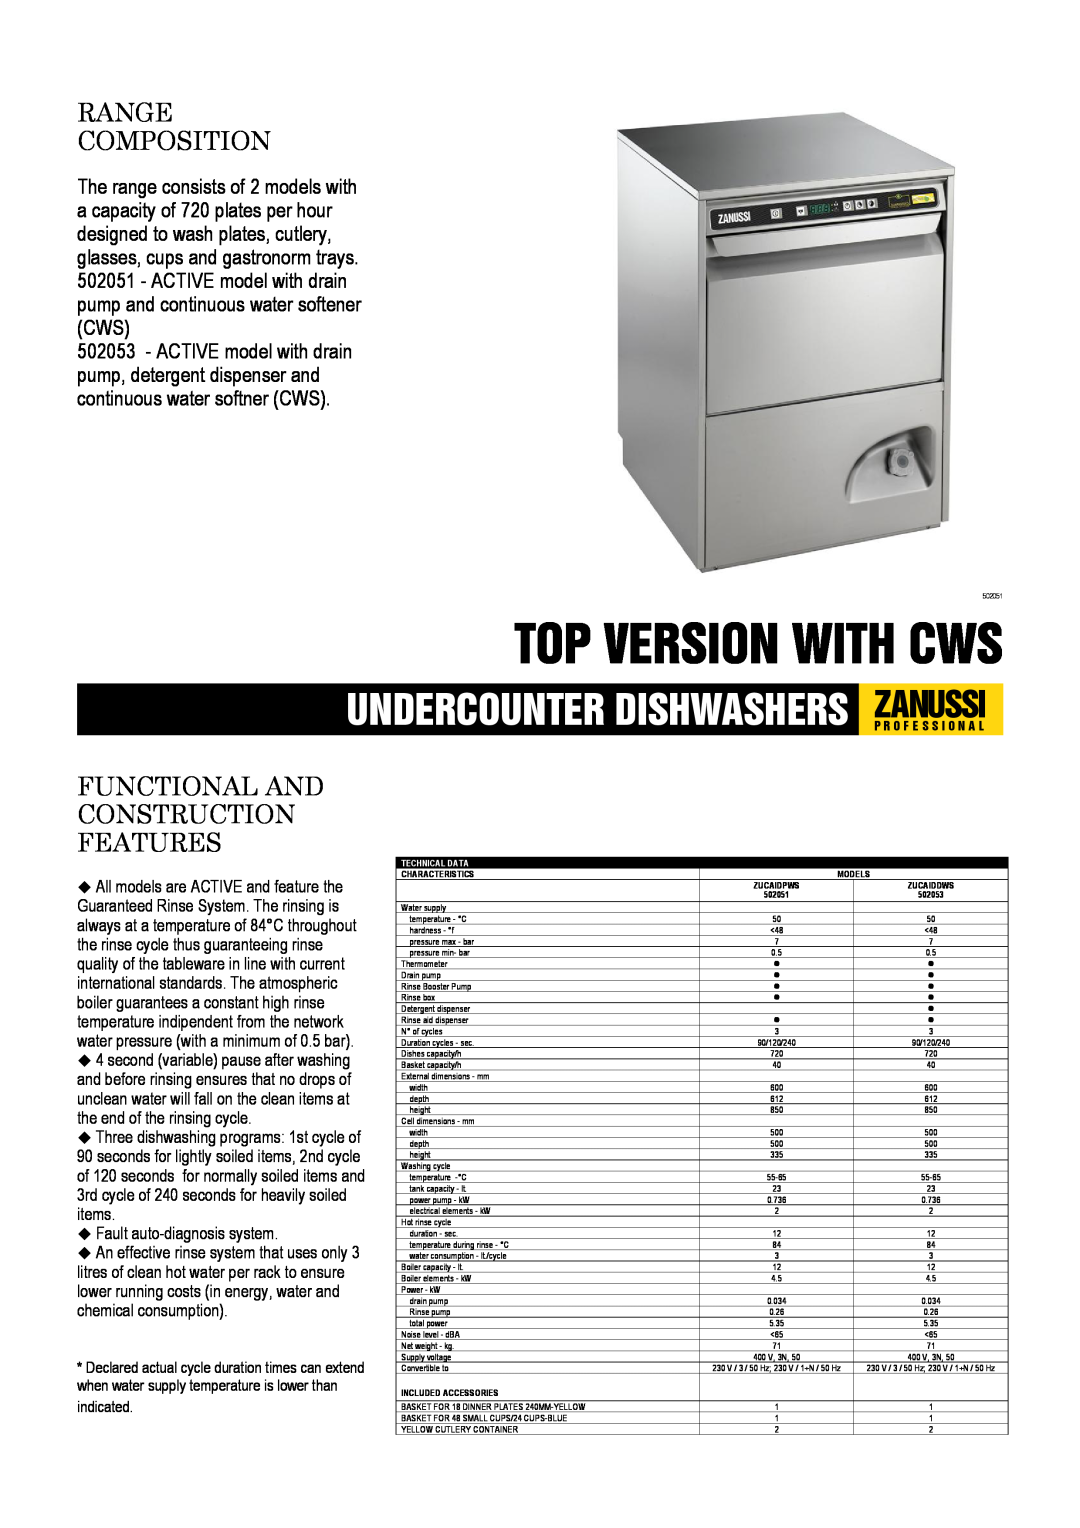 Zanussi ZUCAIDDWS, ZUCAIDPWS dimensions Top Version With Cws, Range Composition, Functional And Construction Features 